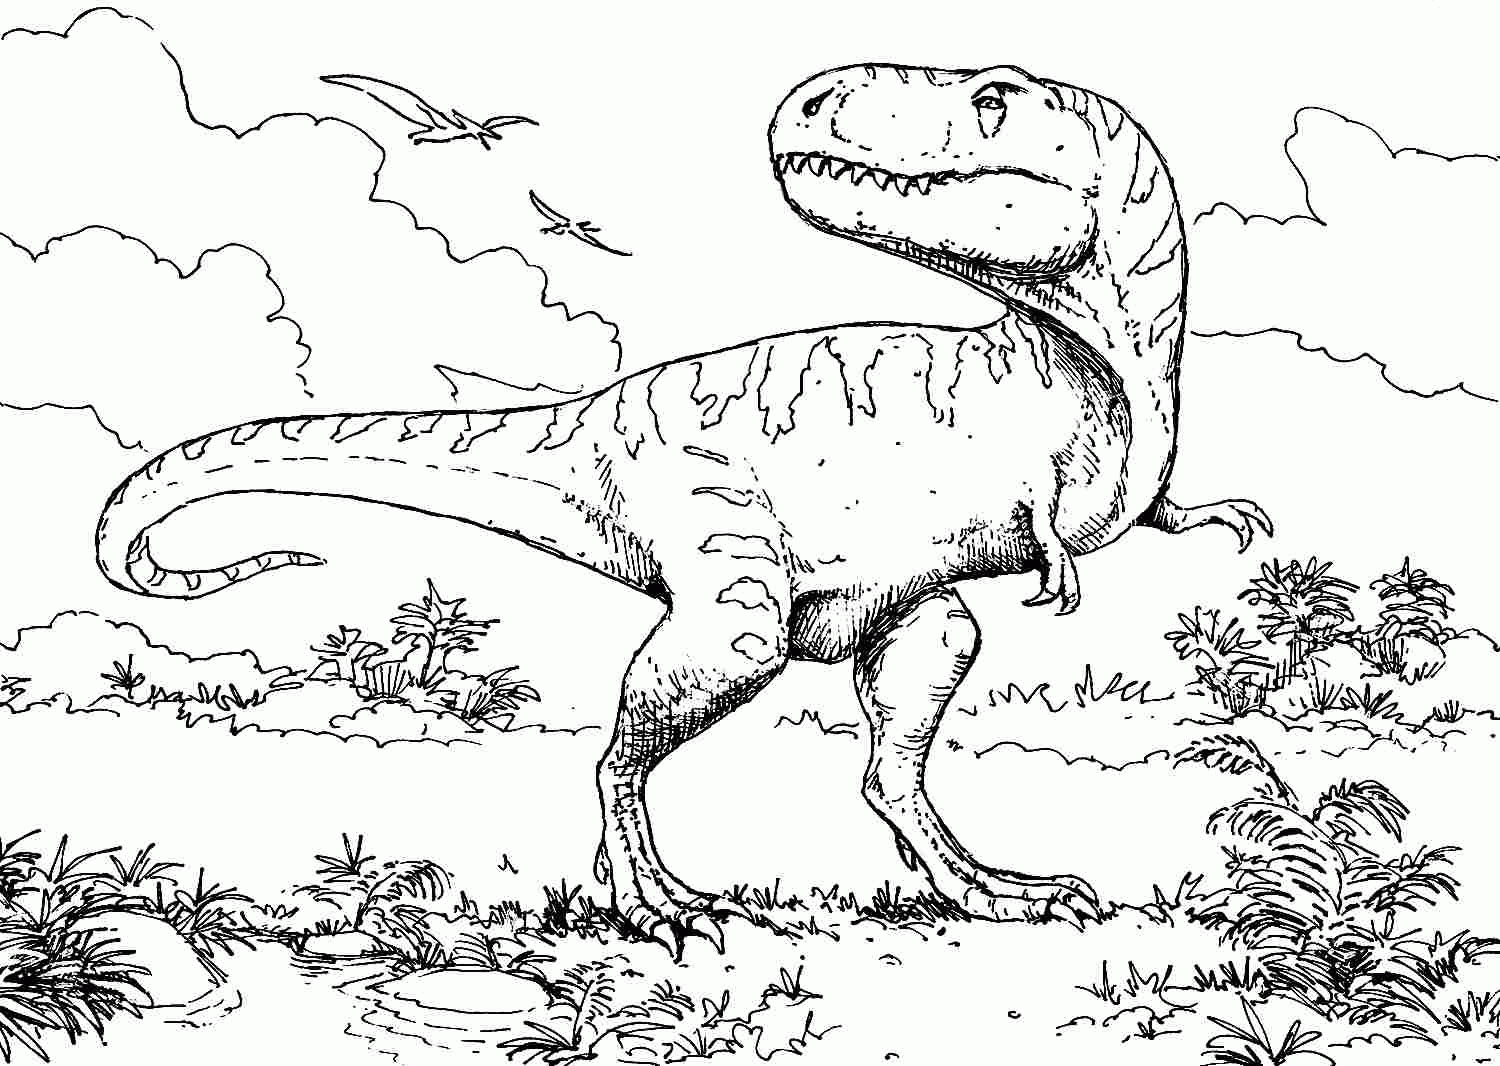 Coloring Pages : Dinosaur Coloring Pages For Kids And Adults ...